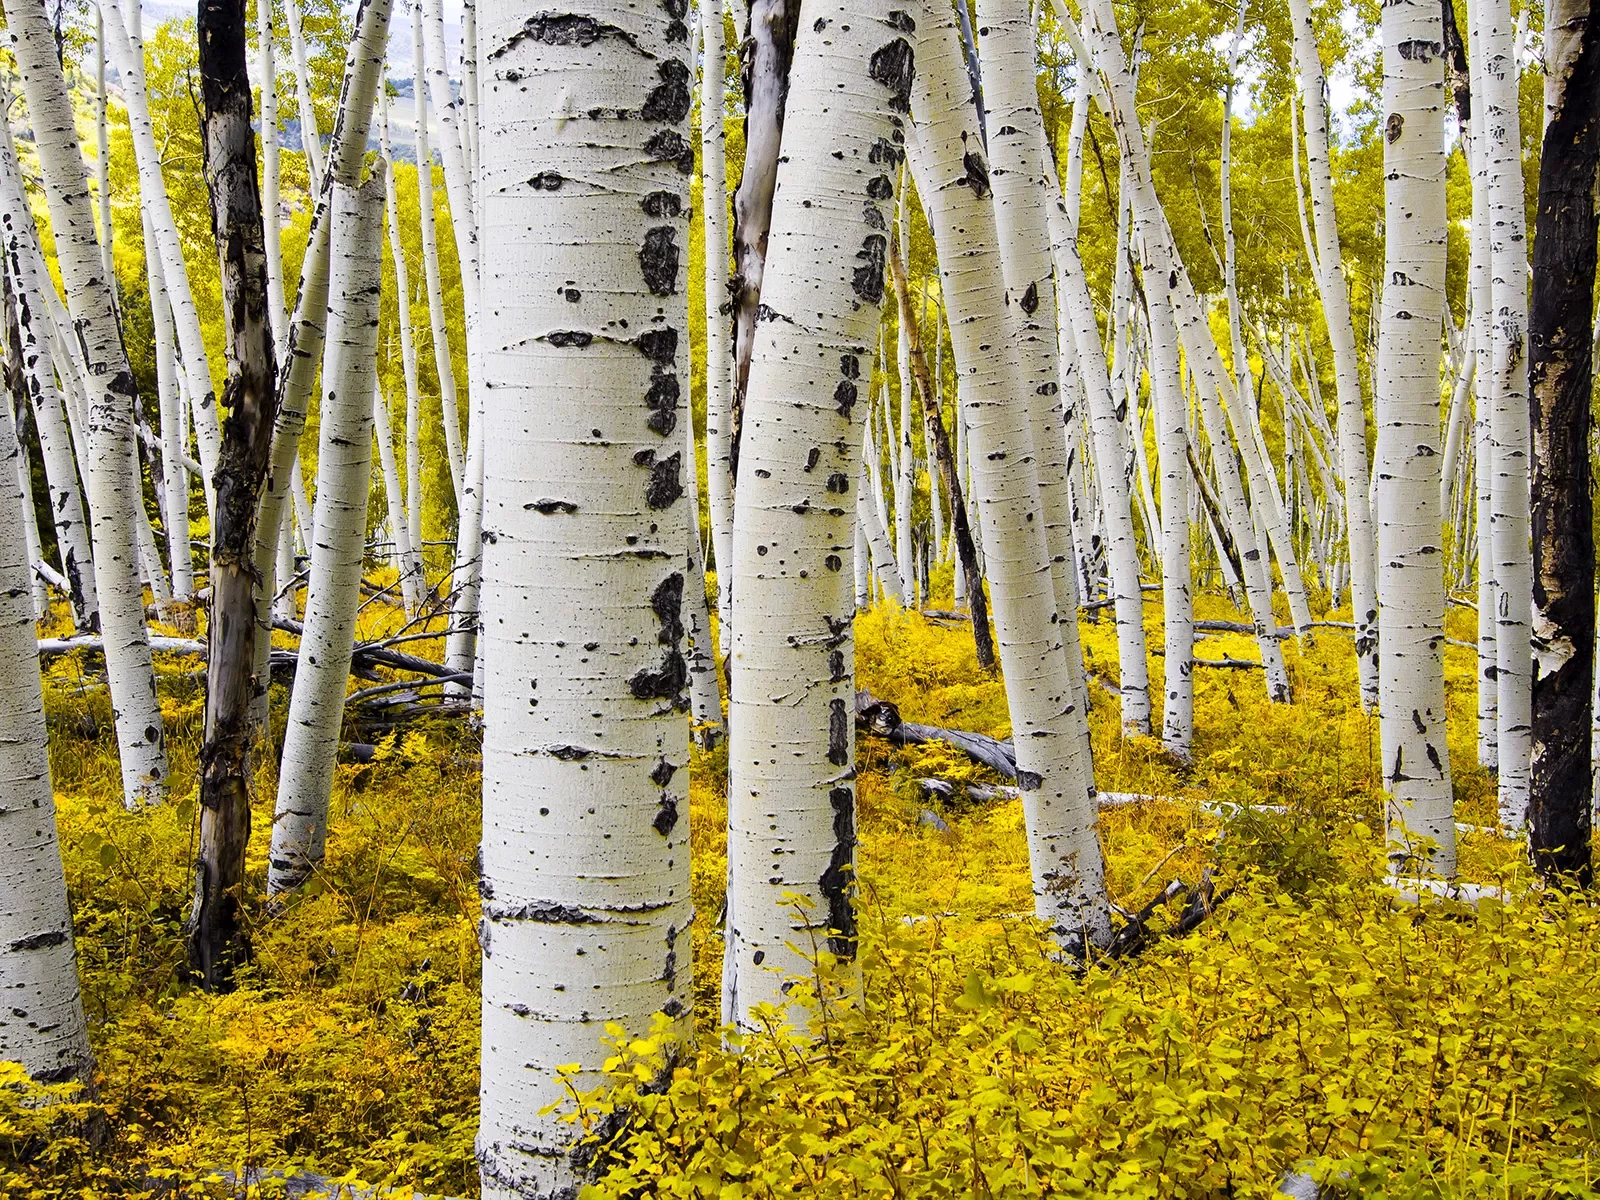 Birch forest with yellow plants